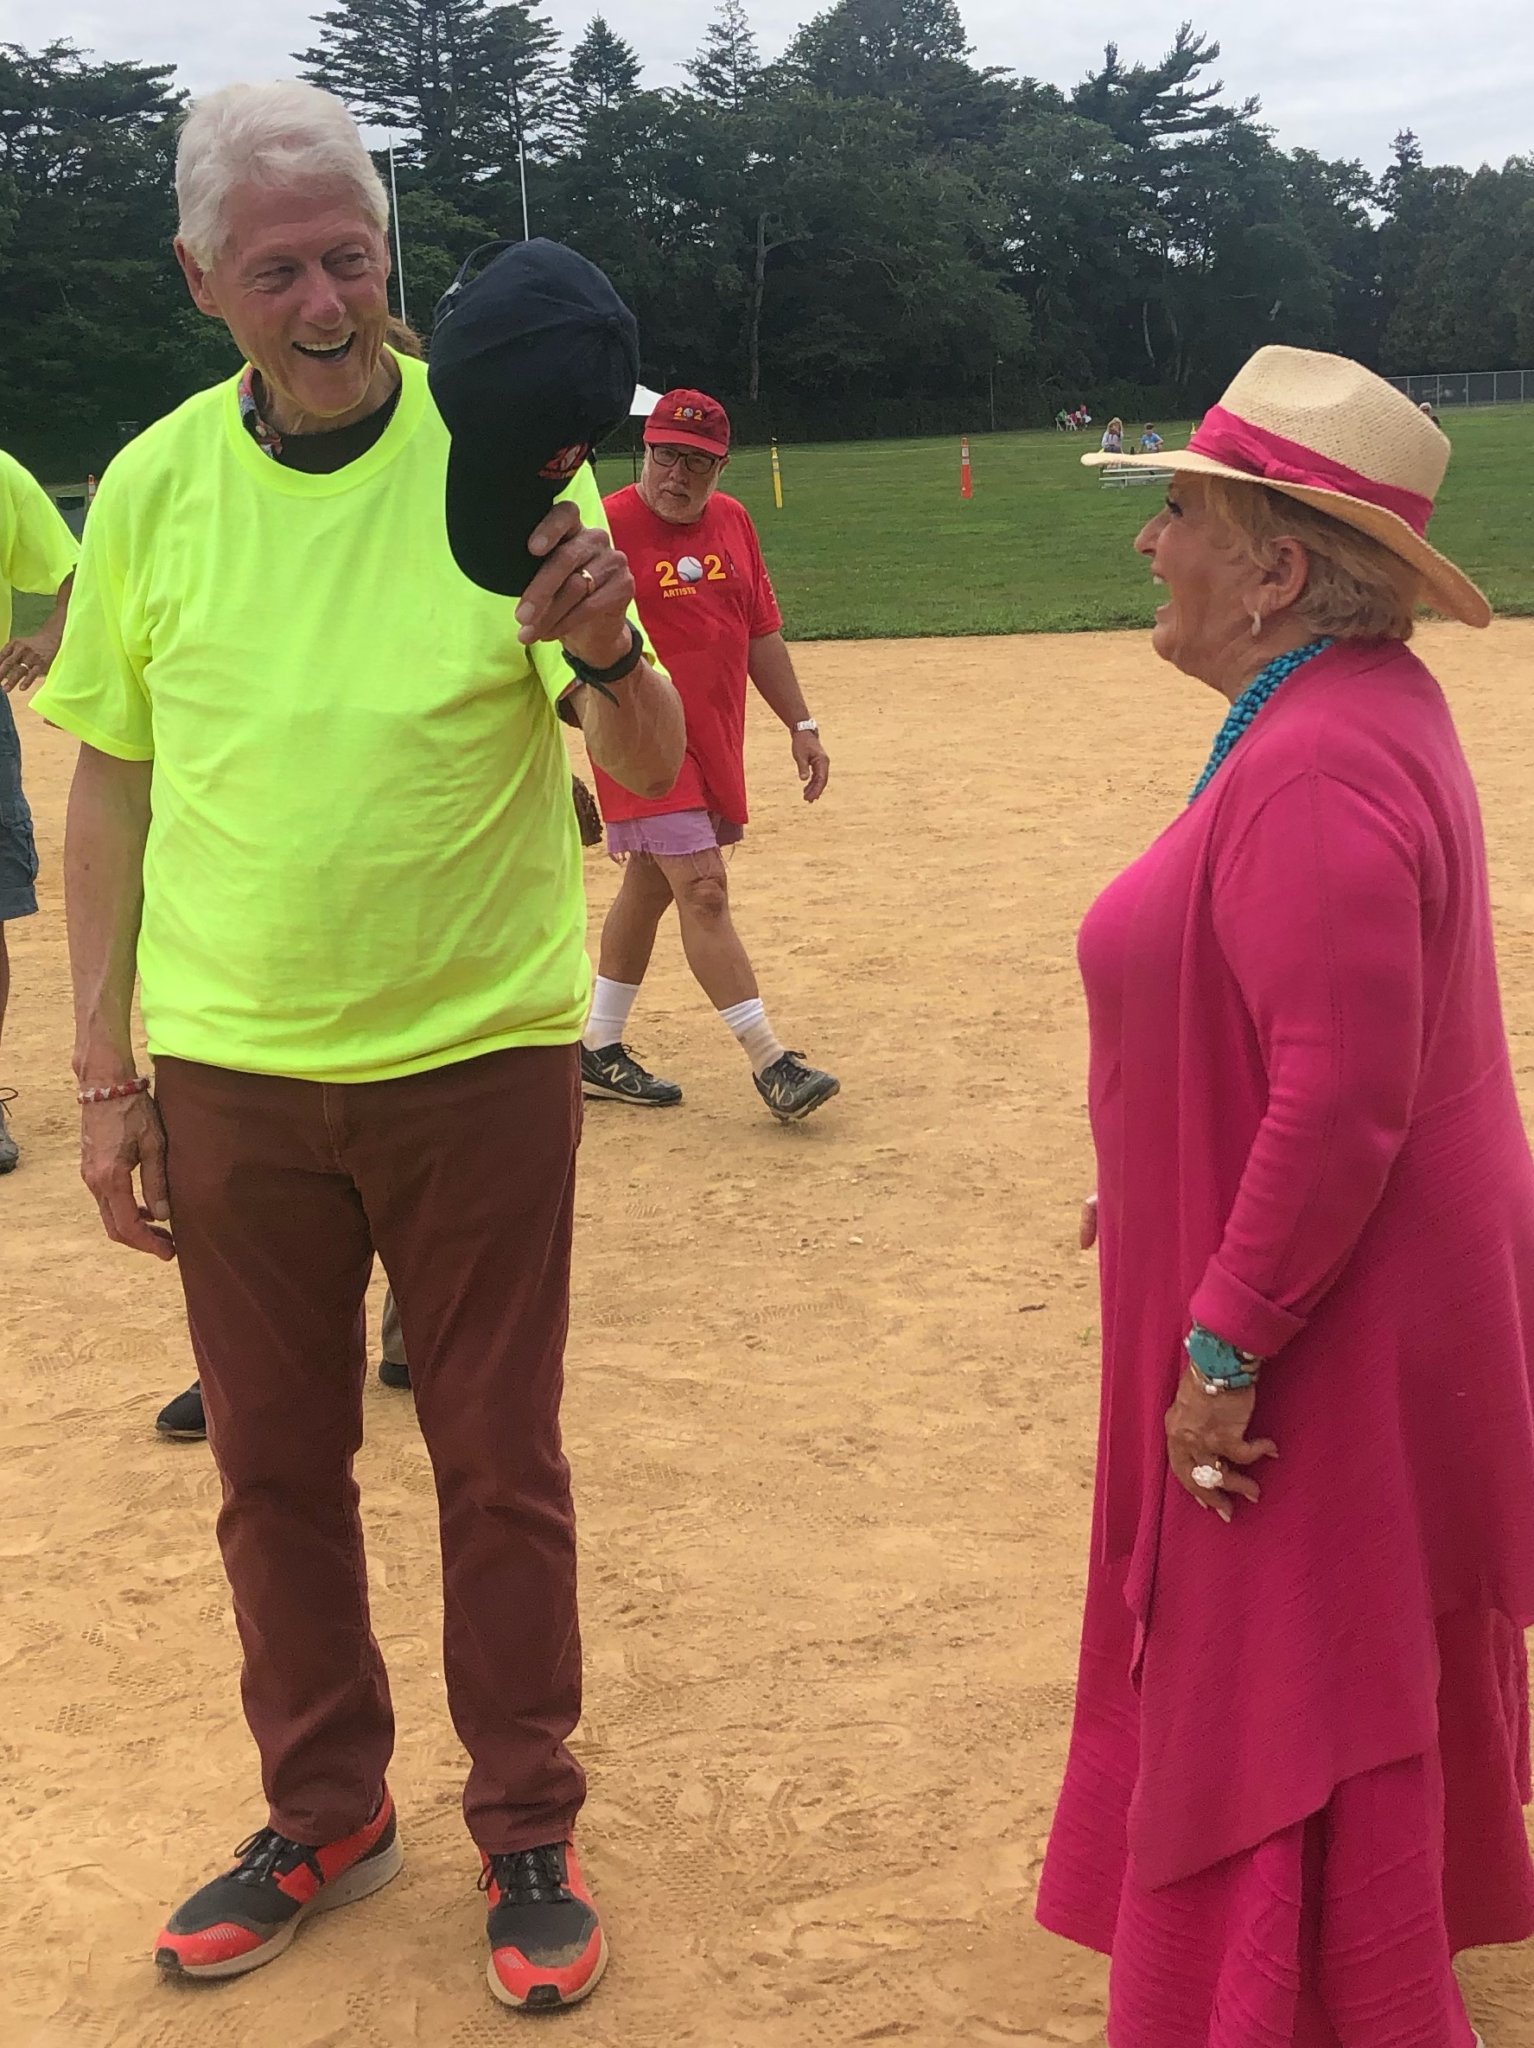 Victoria Schneps and President Bill Clinton on the Artists & Writers Game 2021 field in his neon umpire shirt